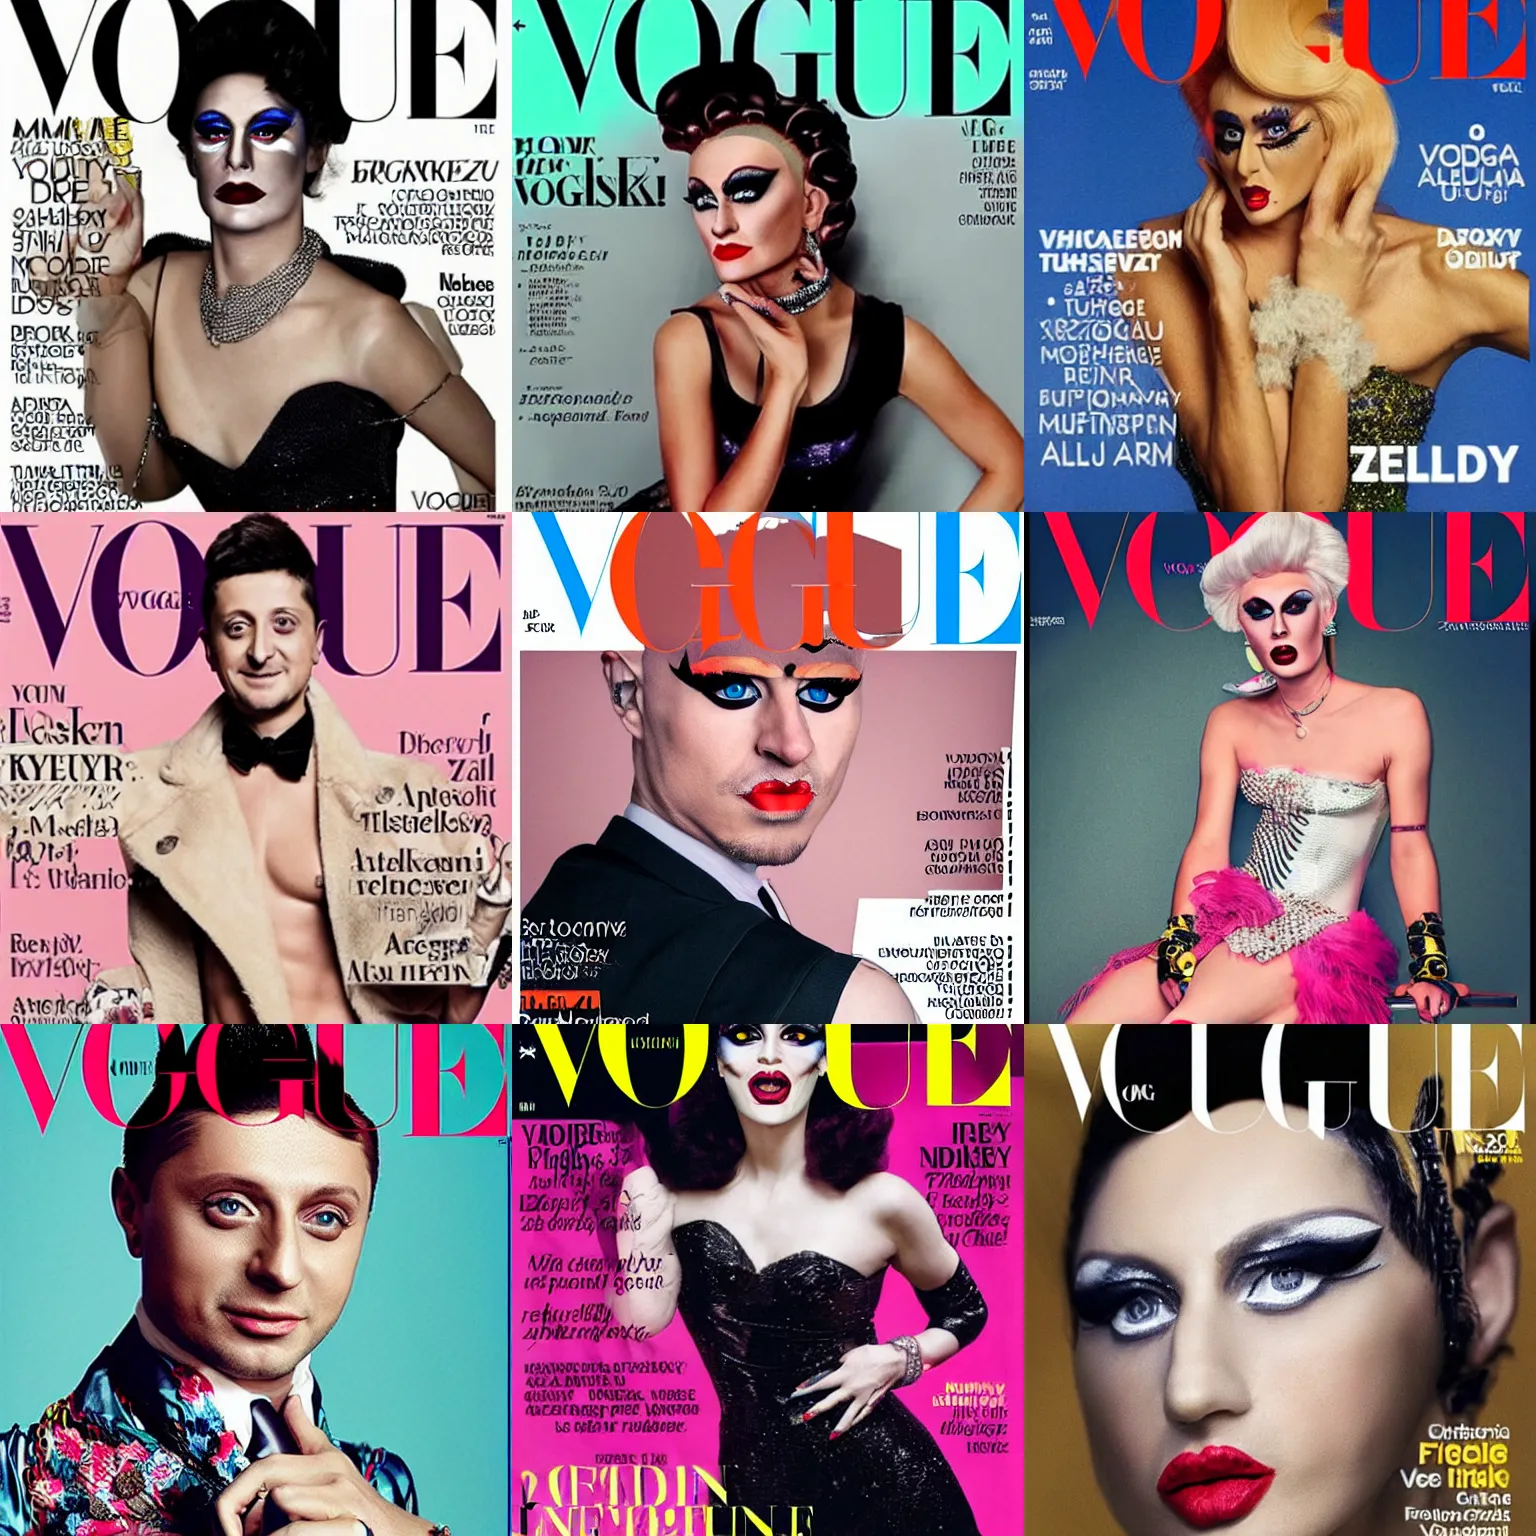 Prompt: Volodymyr Zelensky as a drag queen on the cover of the Vogue magazine